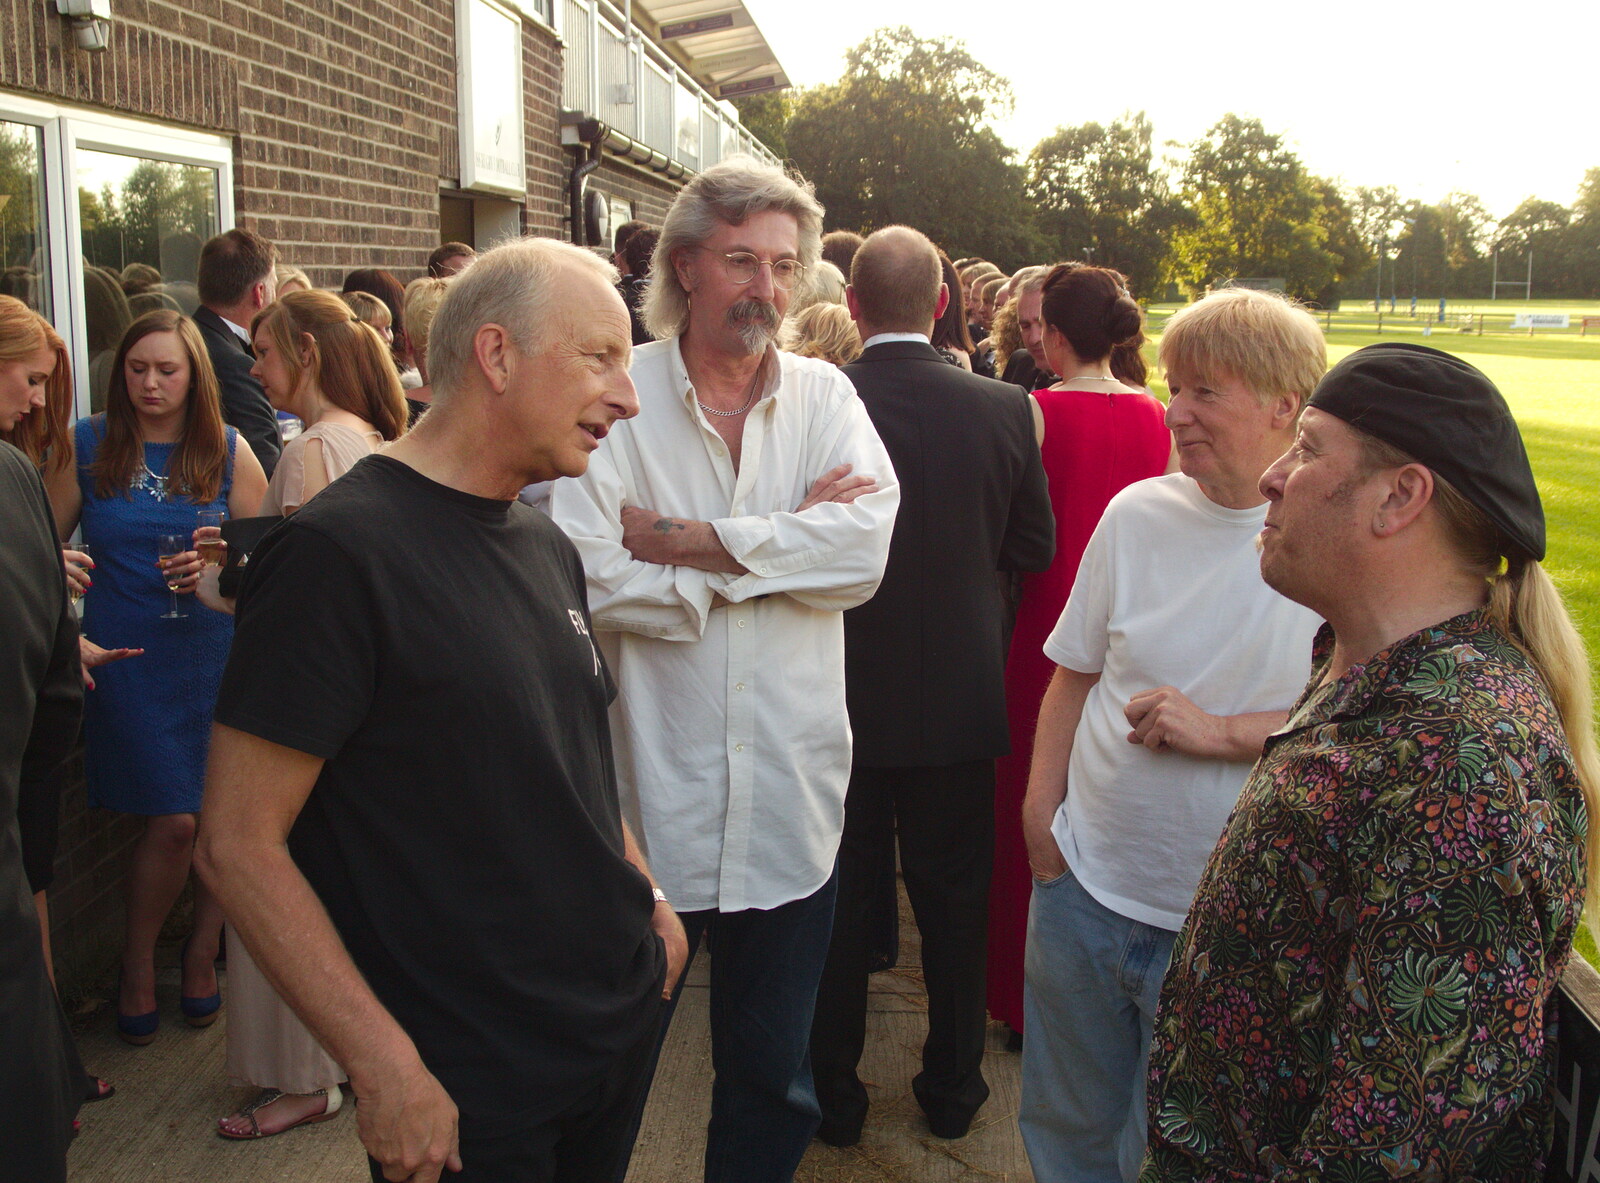 We hang around outside, with the guests from The BBs at Diss Rugby Club, Bellrope Lane, Roydon, Norfolk - 7th June 2014